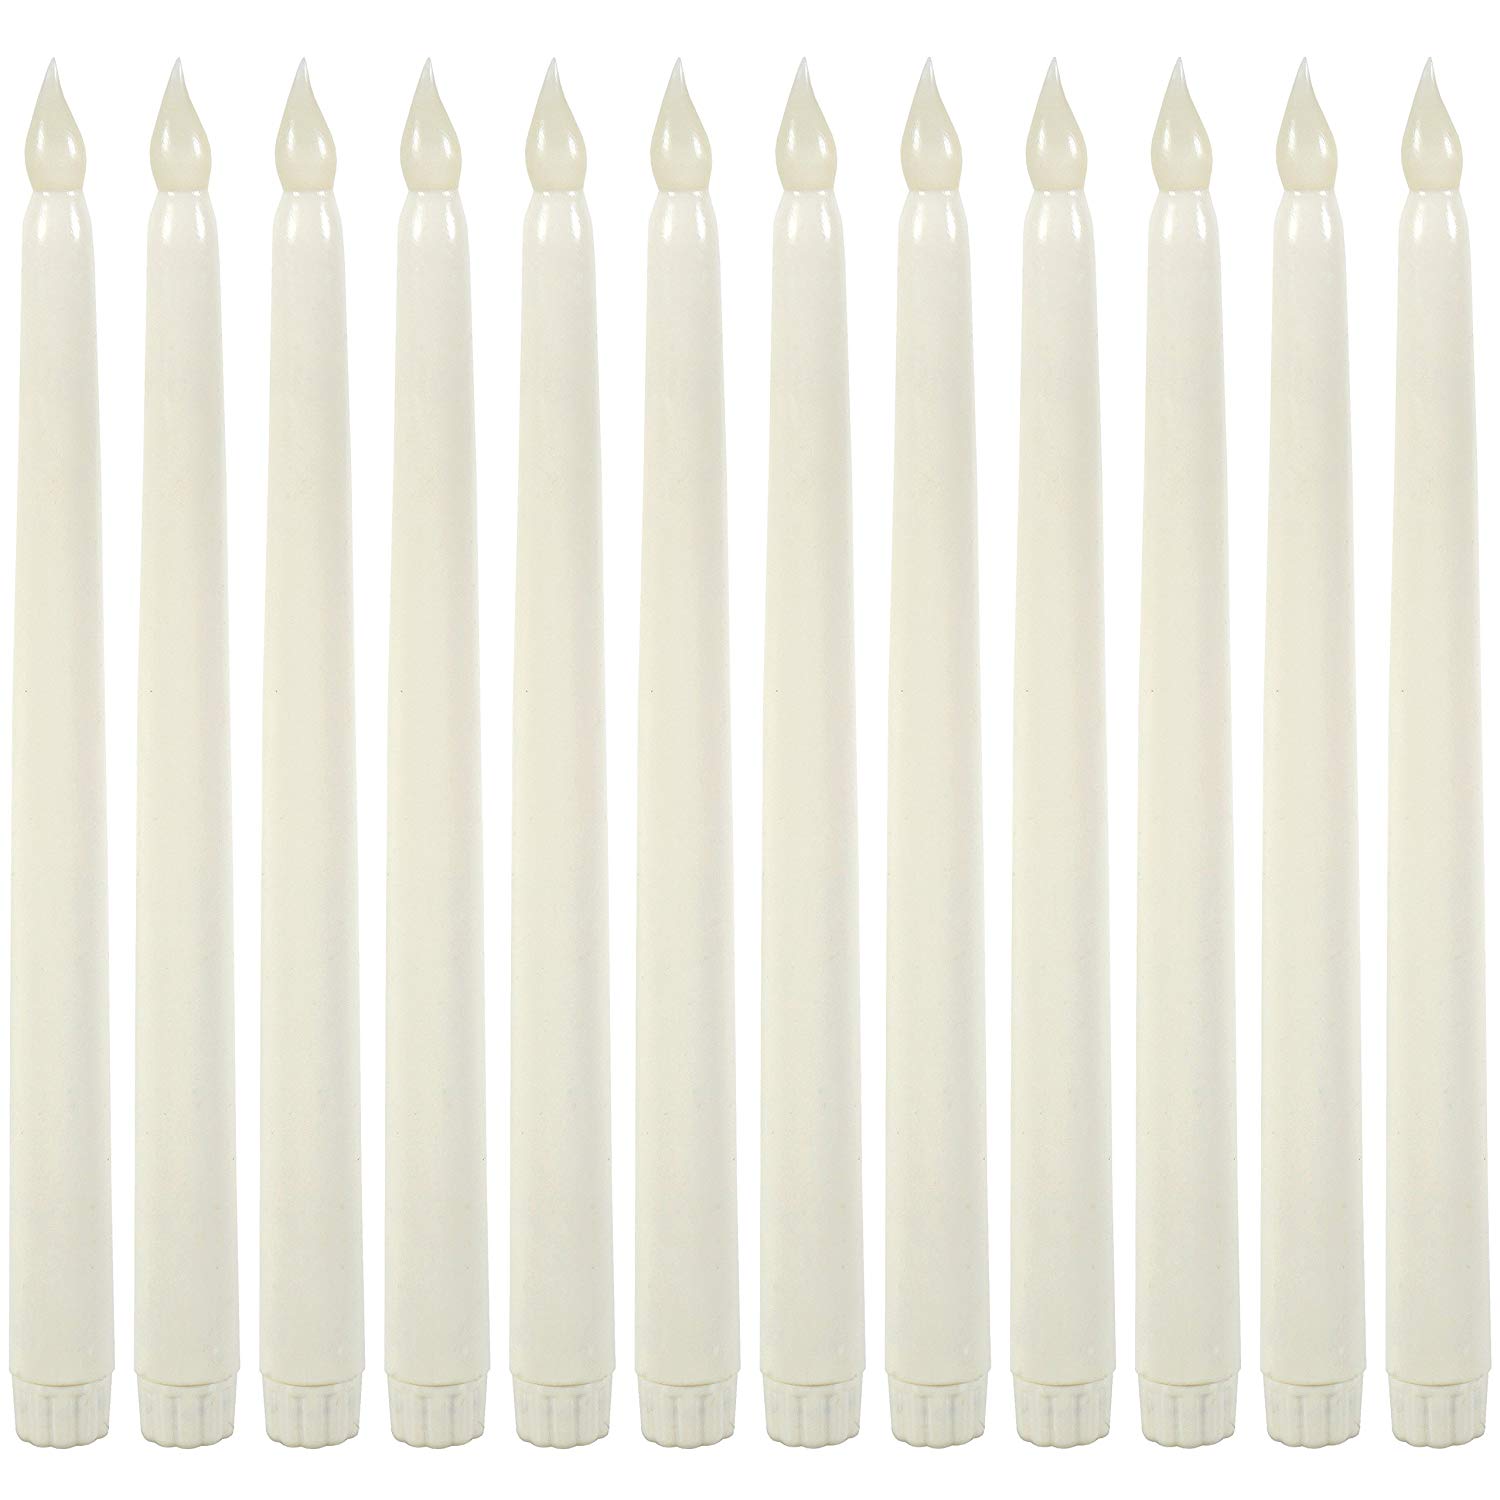 11 Inch Realistic Flameless Taper LED Candle Faux Wax White 6 Pack Safe Tall New 